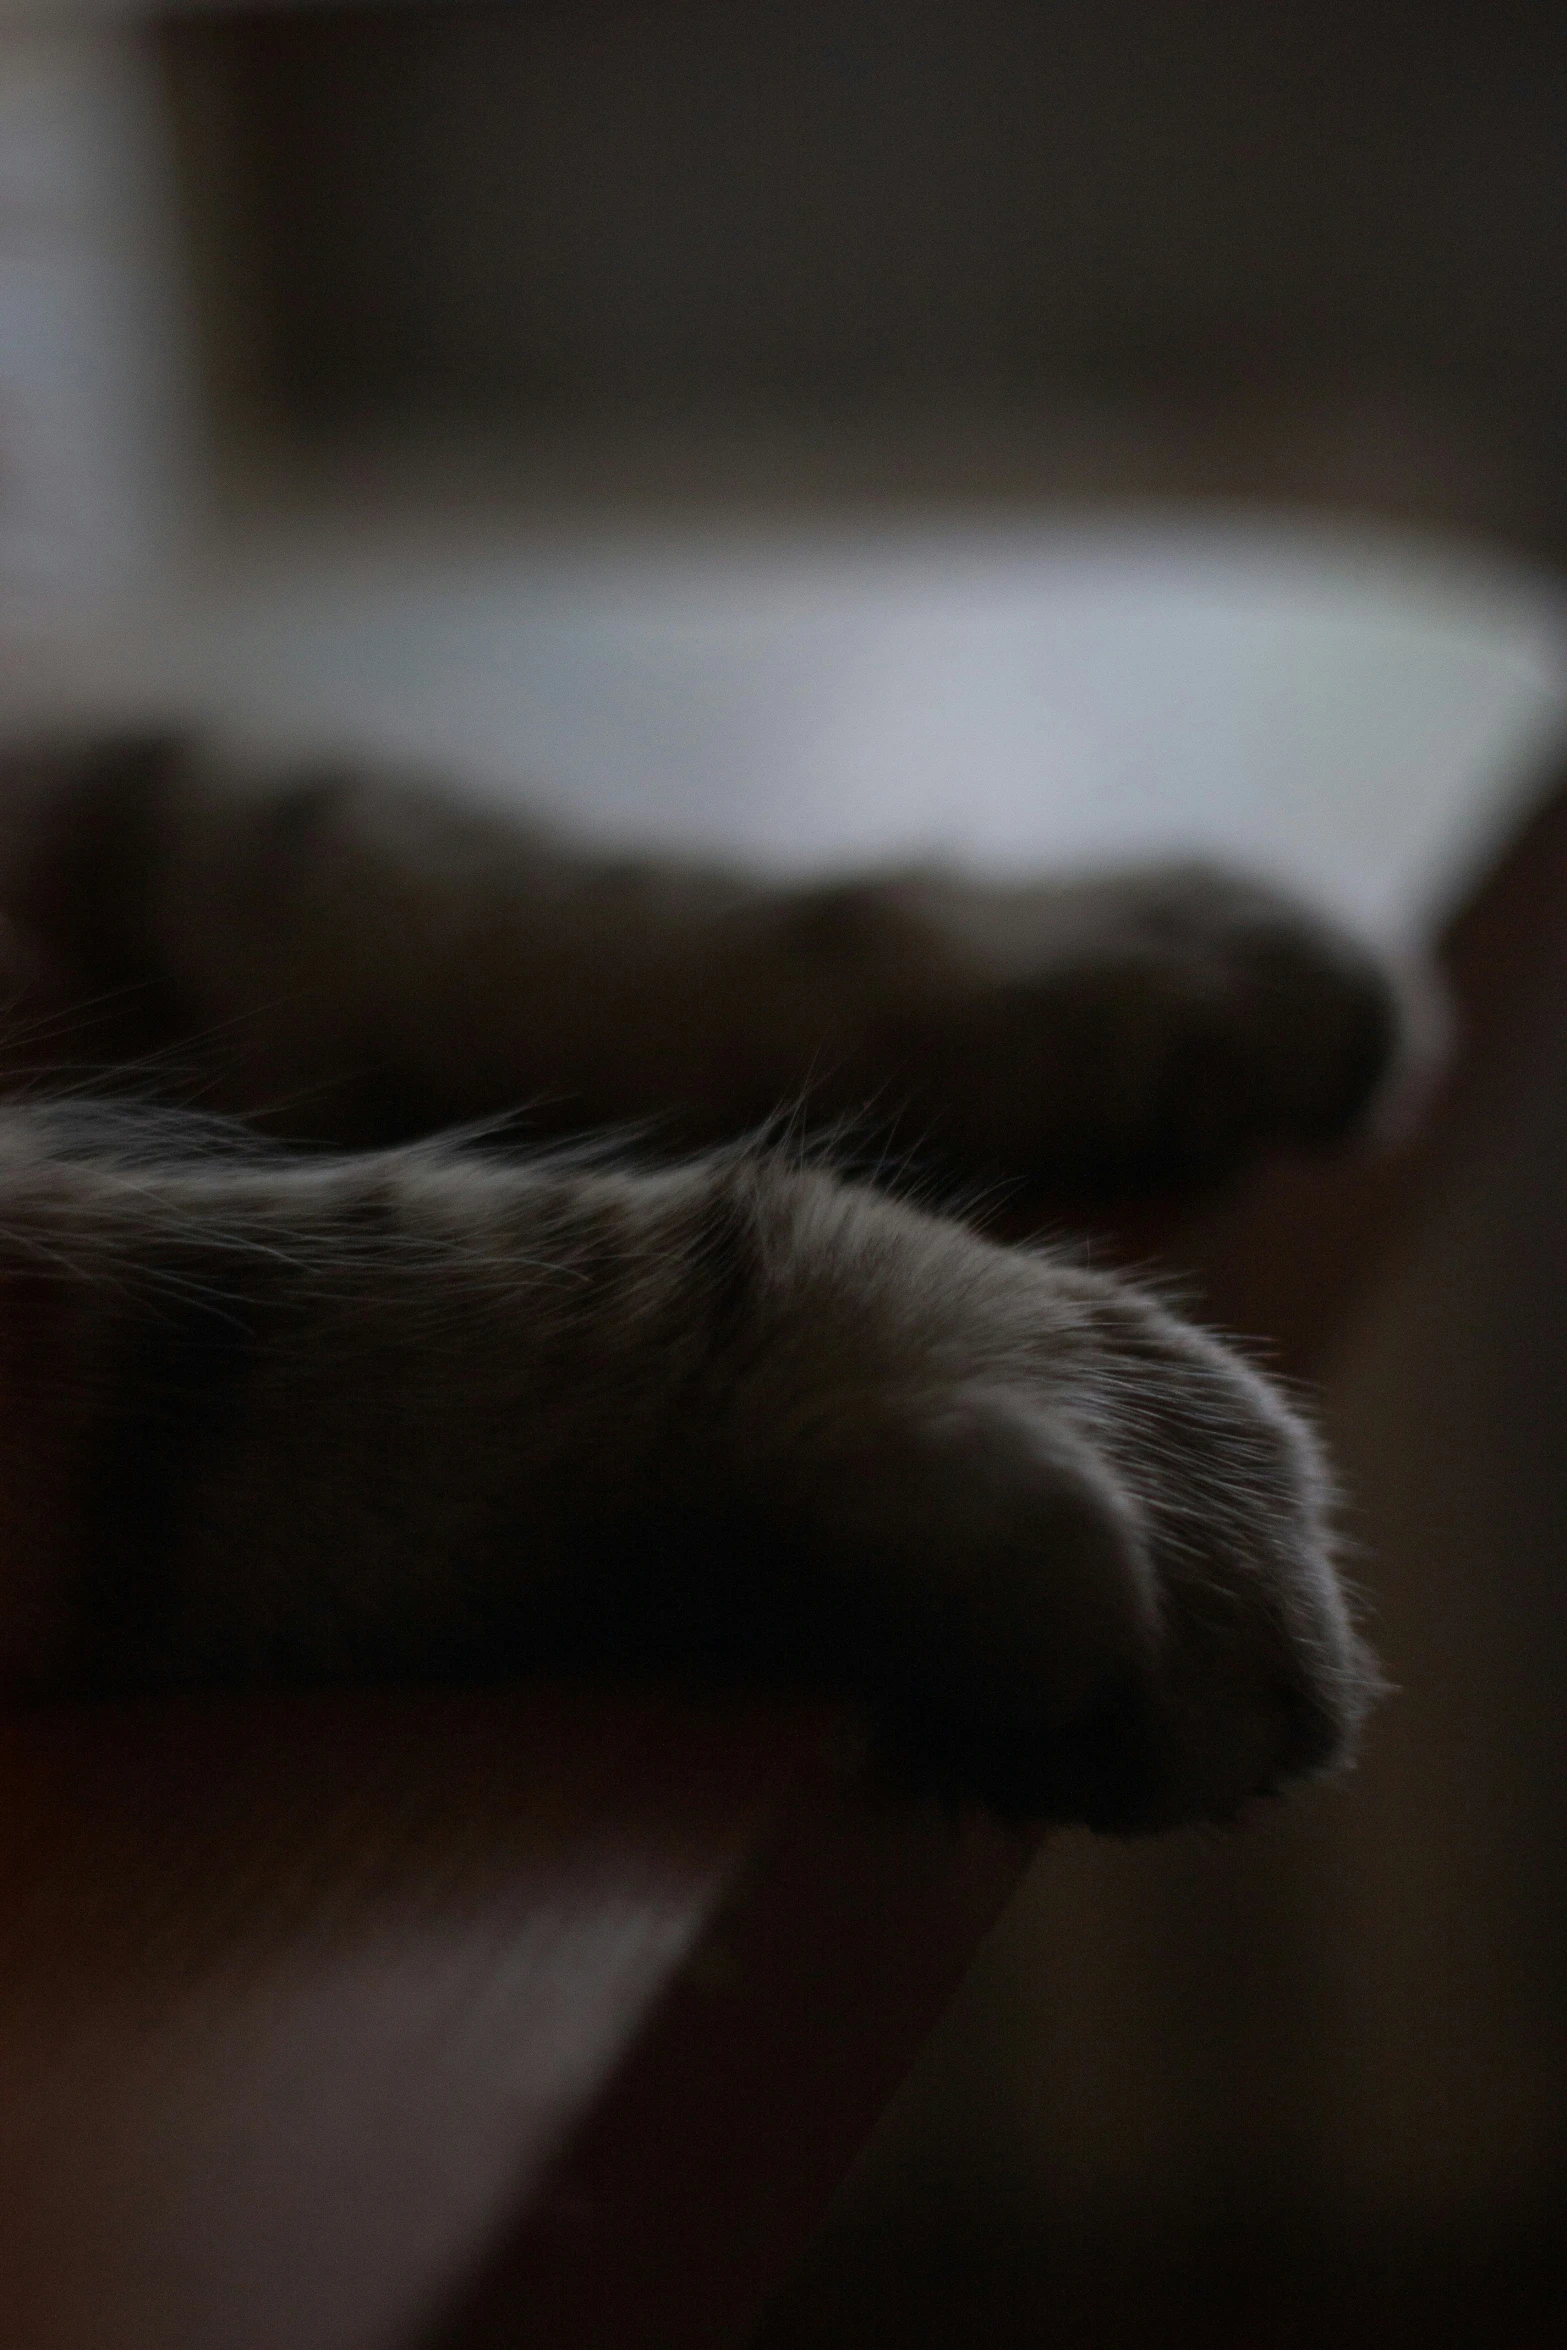 the cat's paws are visible as it lays on its side